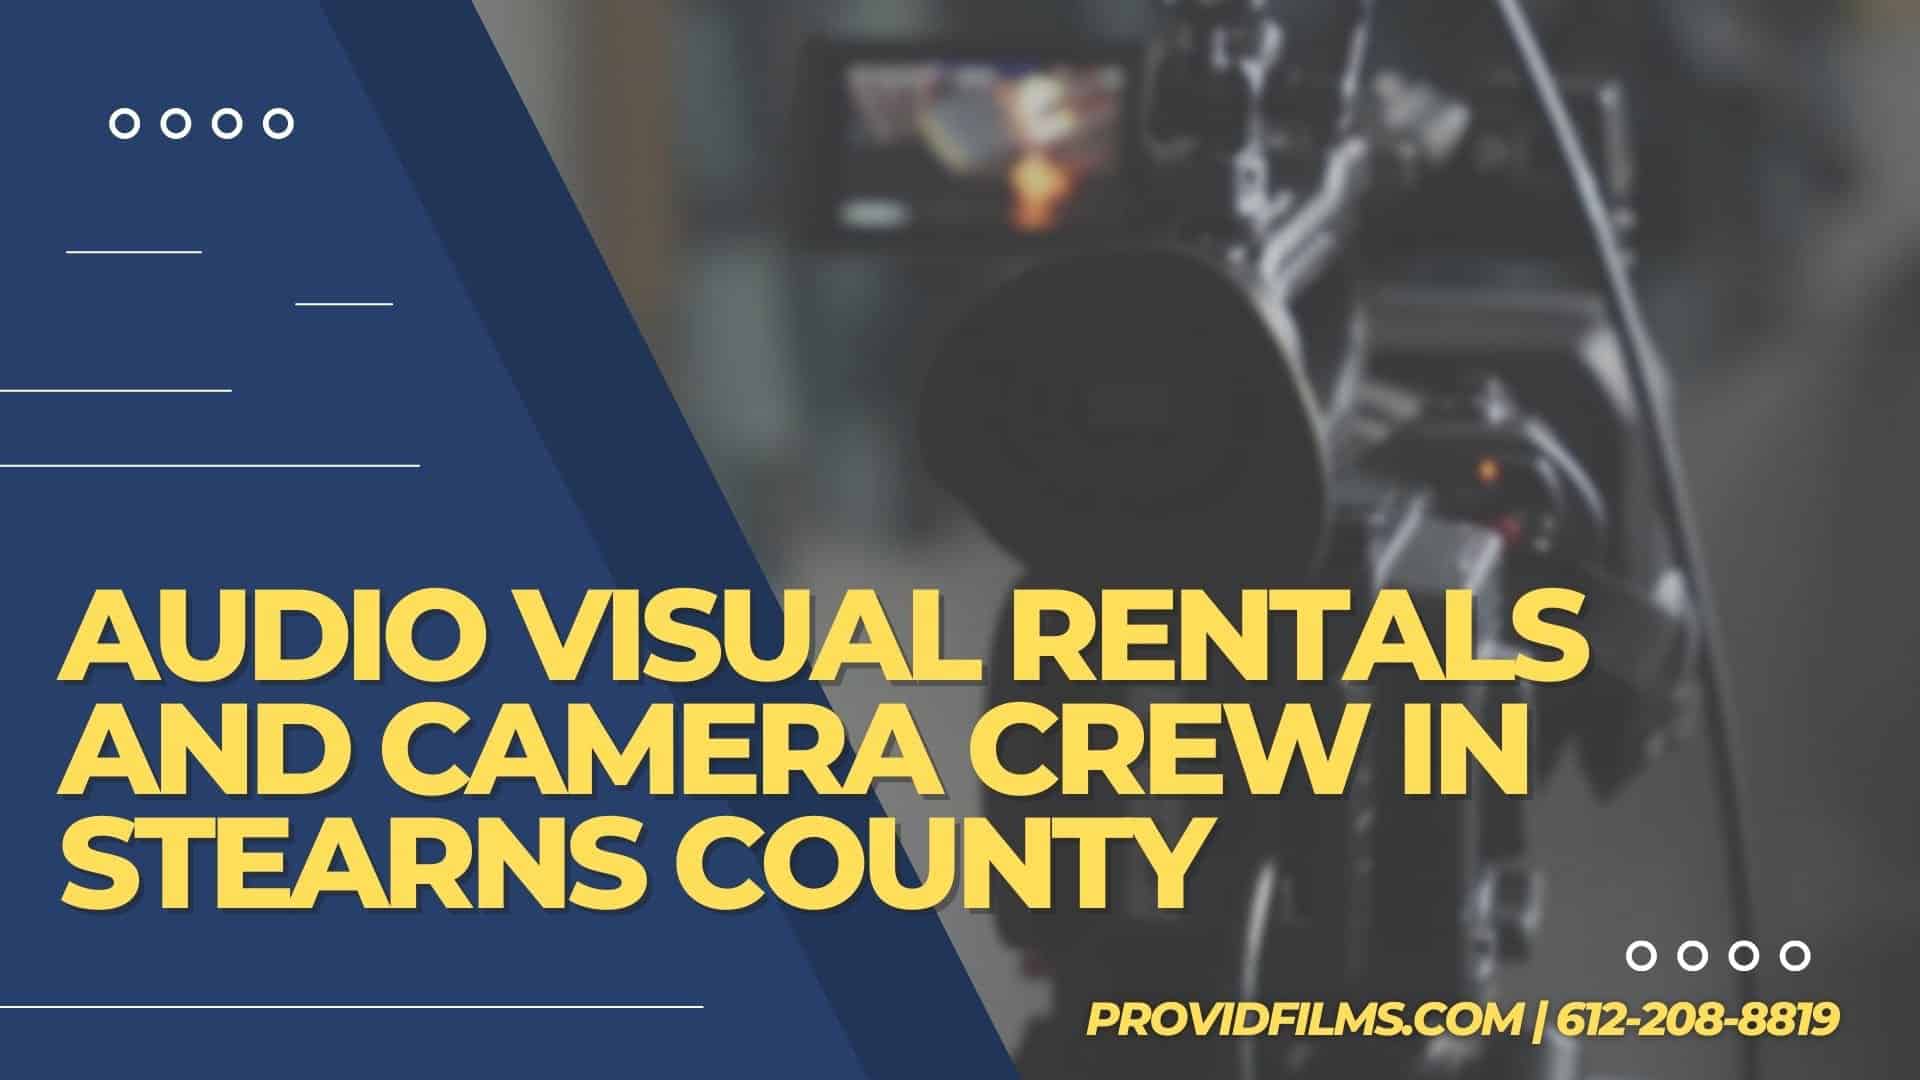 Graphic with a video camera crew with the text saying "AV Rental and Camera Crew in Stearns County"